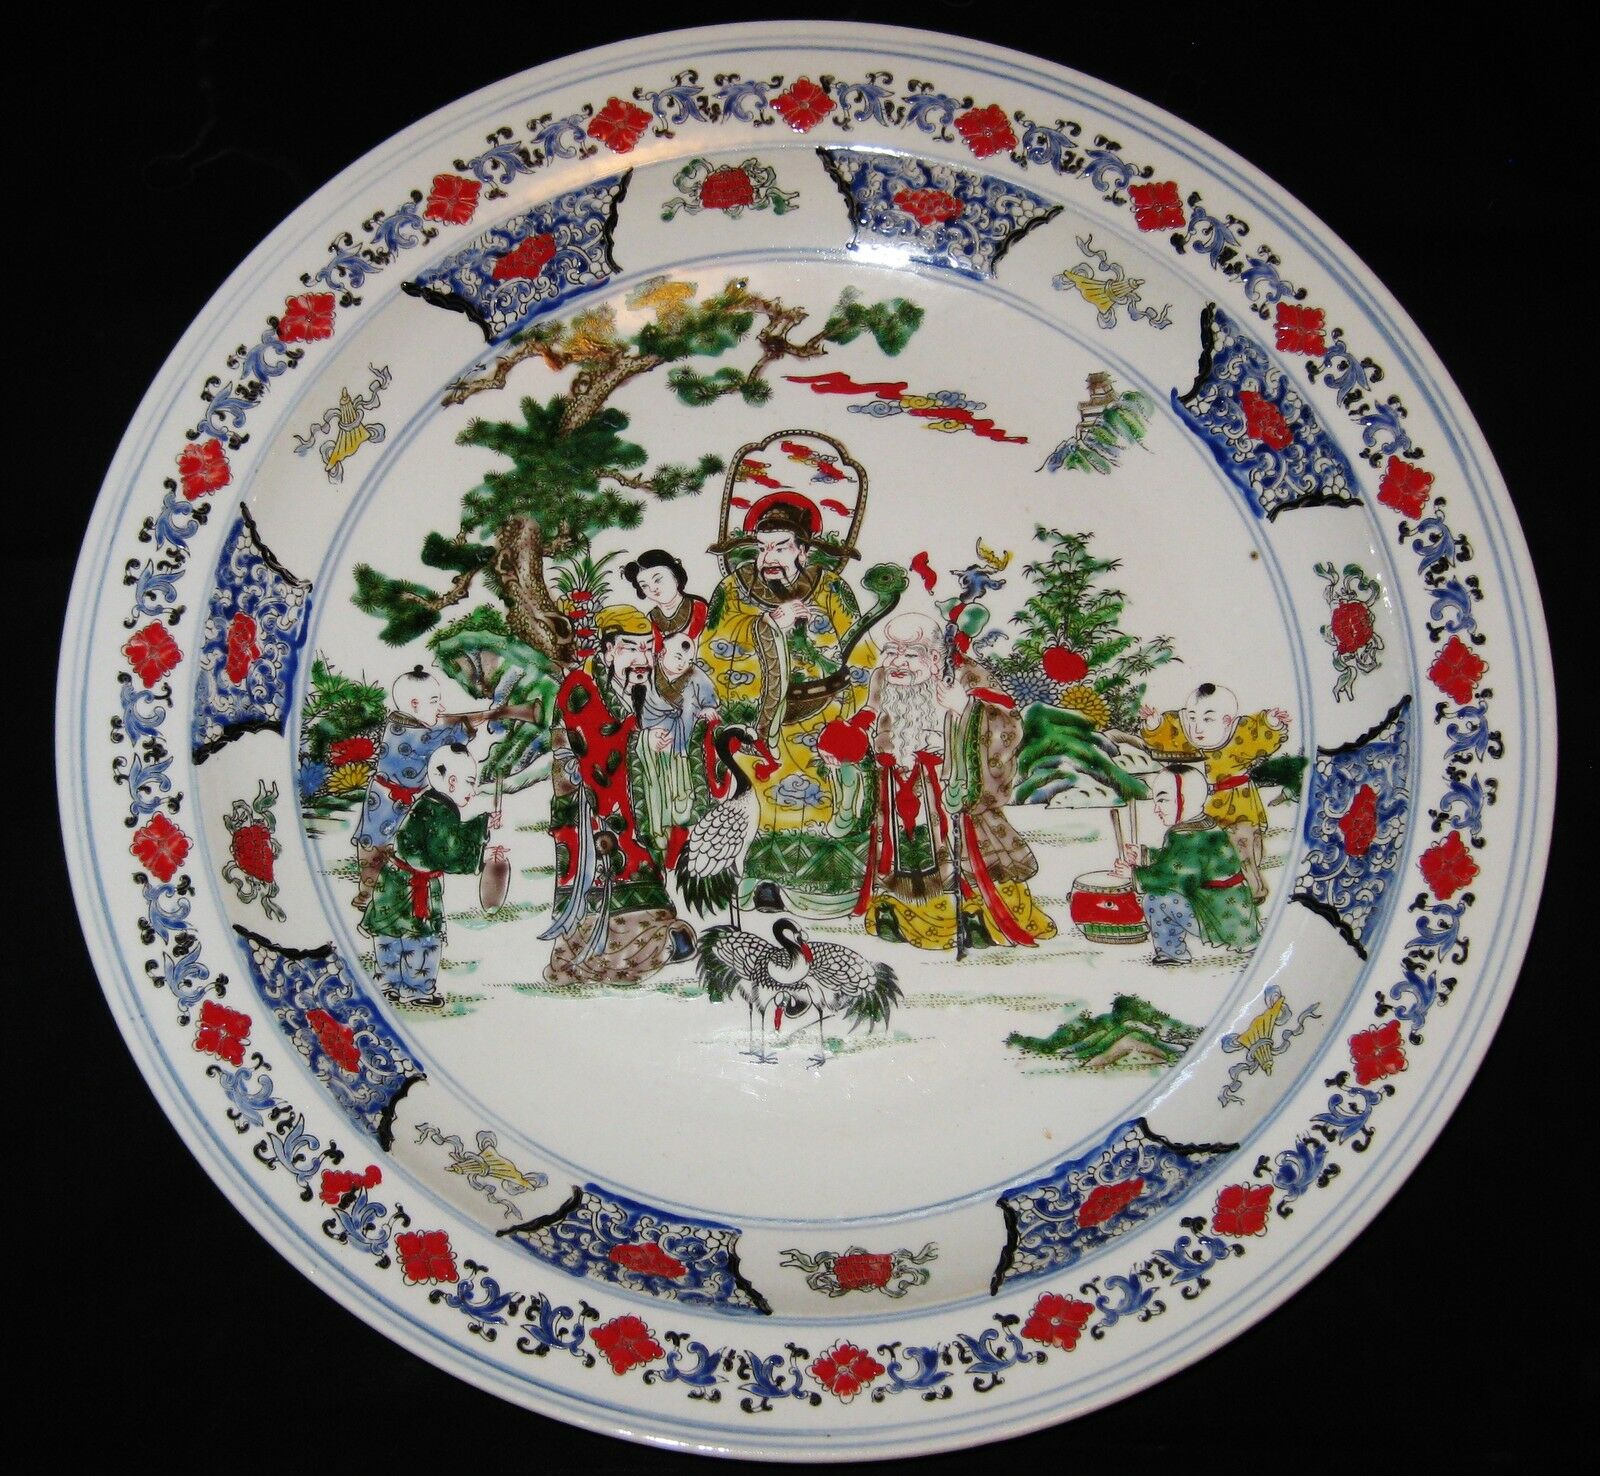 Antique Valuations: ANTIQUE BIG CHINESE PORCELAIN CHARGER 45 cm, HAND PAINTED KANG -XI  MARK, NR